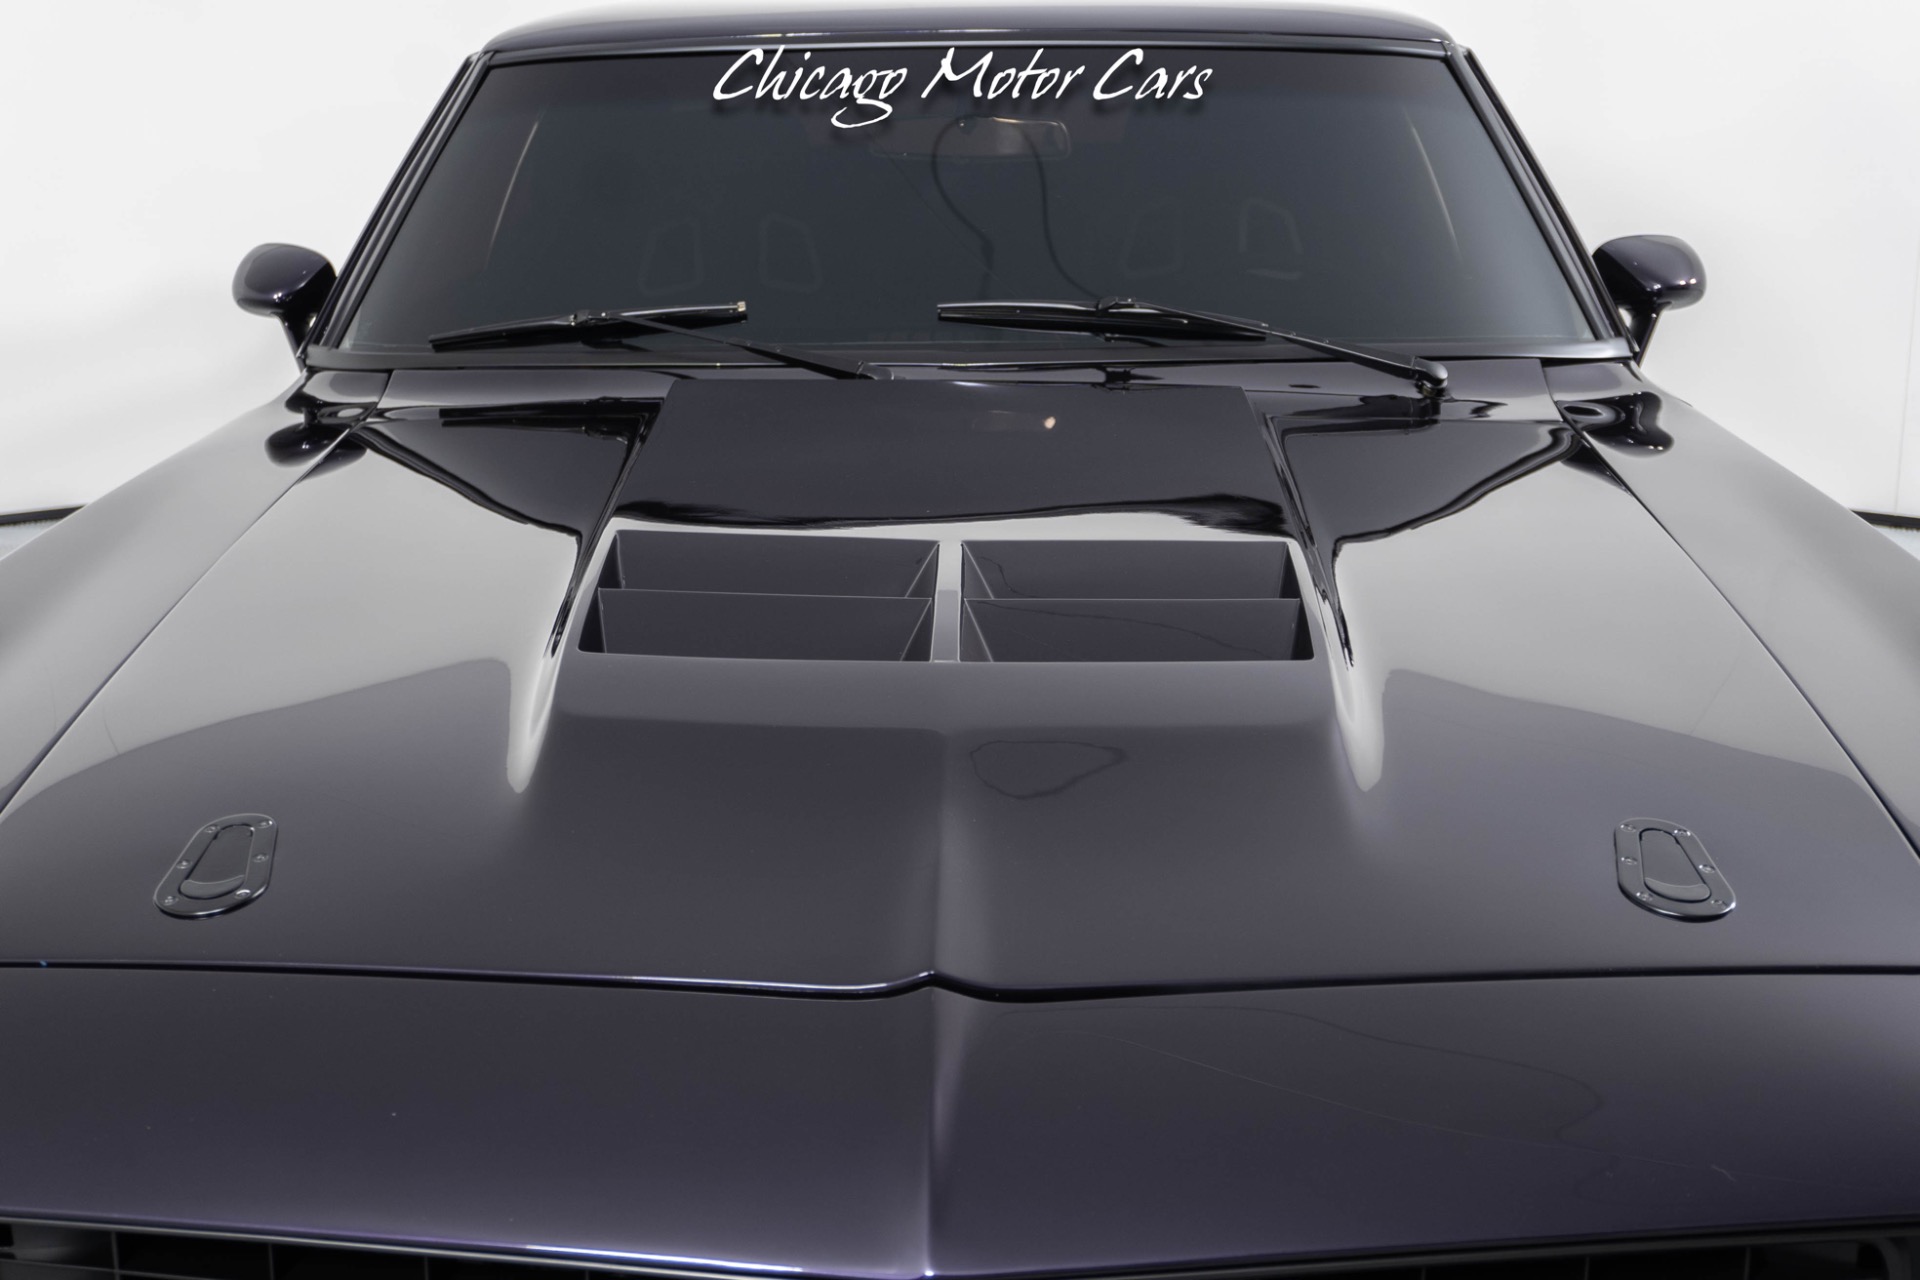 Used-1969-Chevrolet-Camaro-SS-Z28-Coupe-ONLY-4K-miles-LS1-Powered-FULL-Restomod-STUNNING